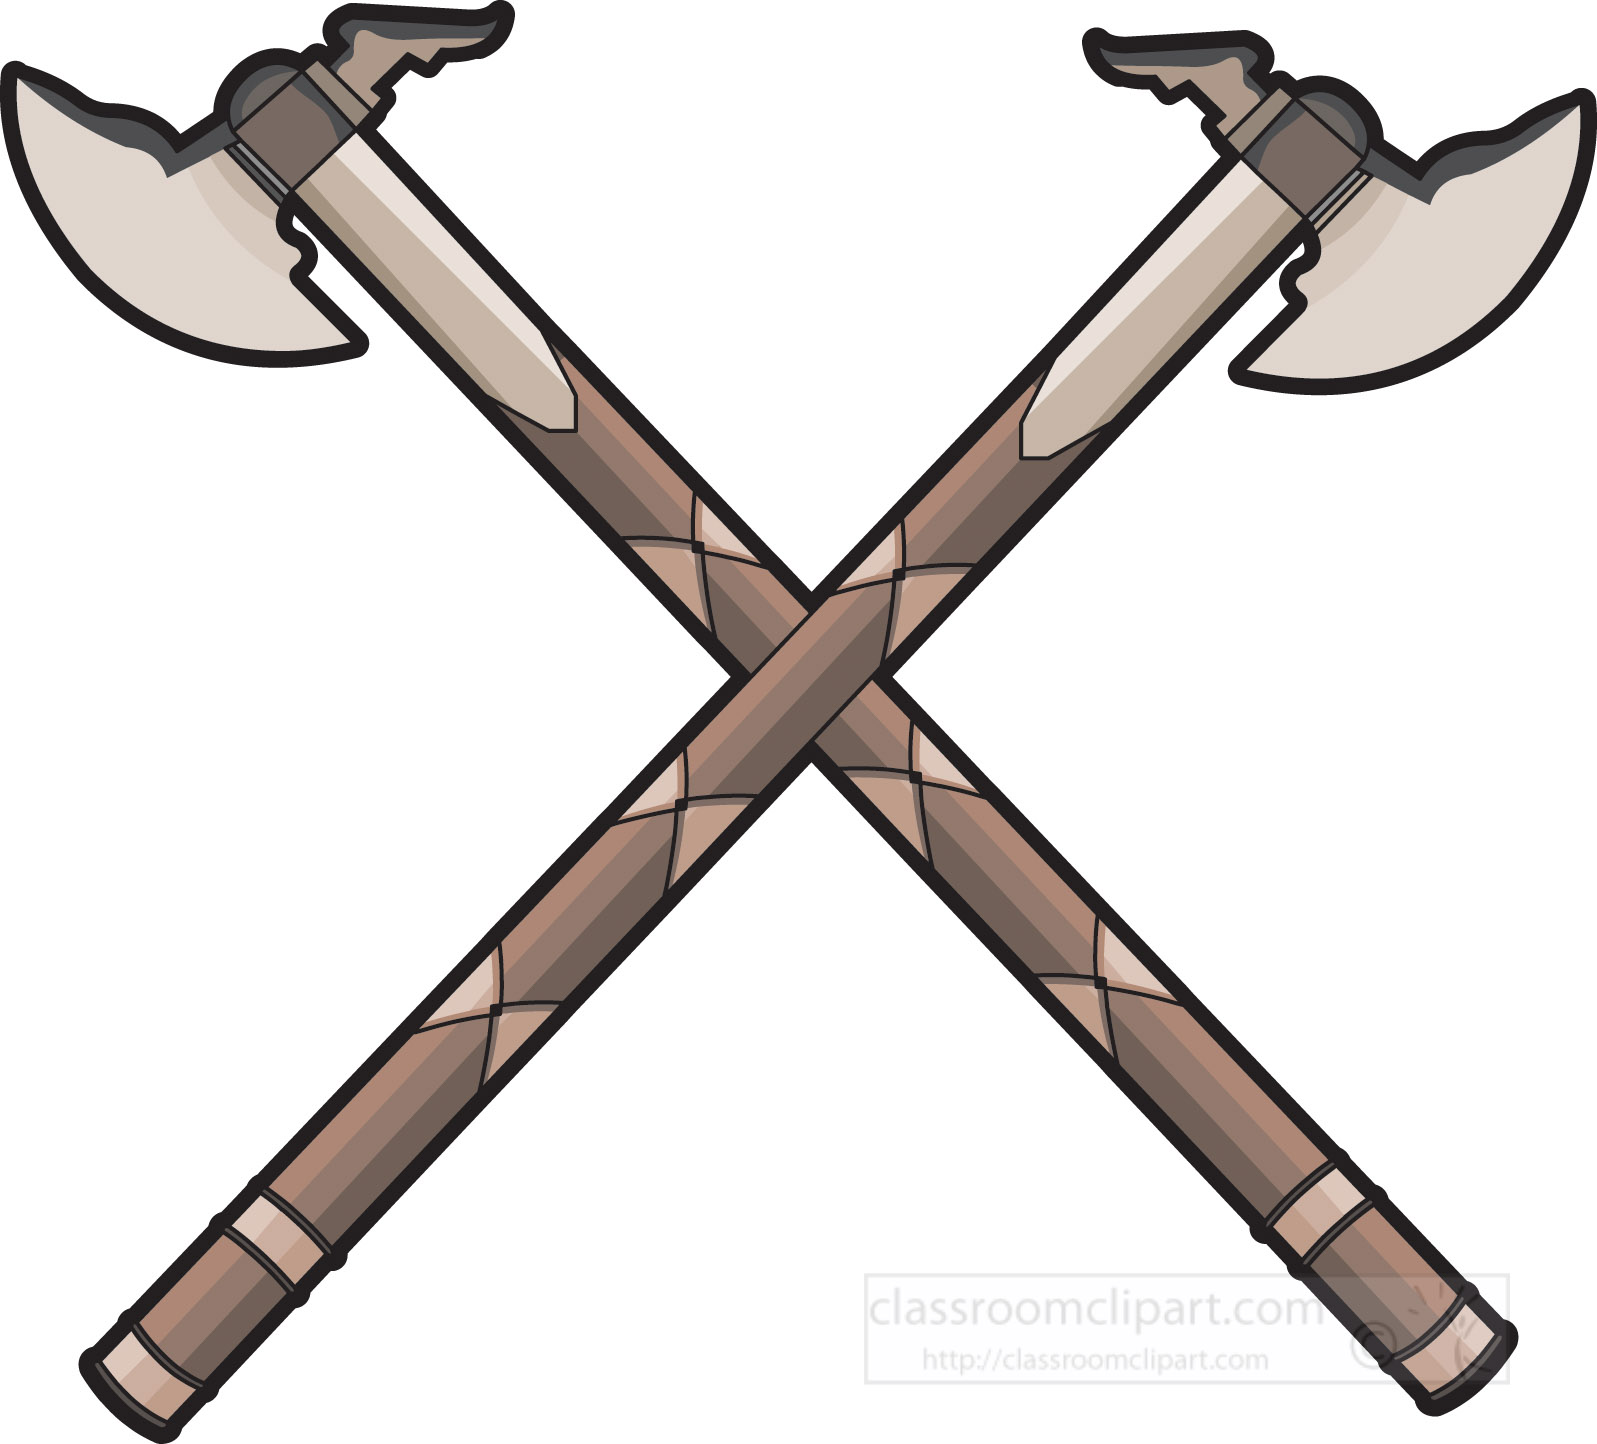 medieval-weapon-the-axe-clipart-graphic-vector-2019.jpg